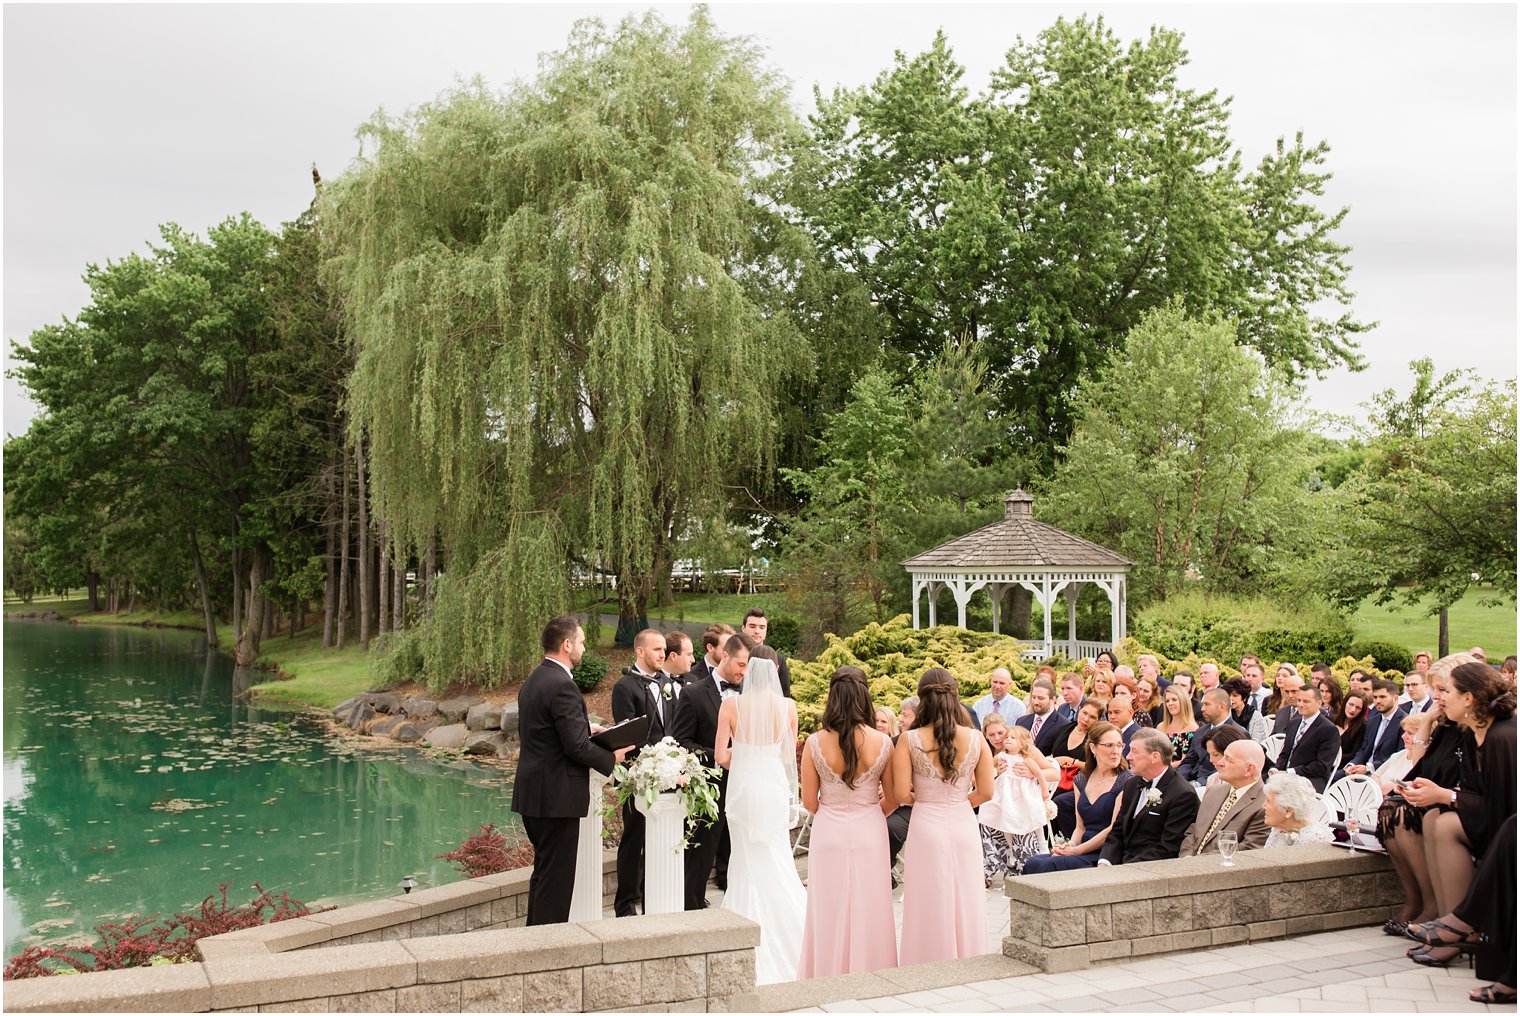 Outdoor ceremony at Windows on the Water at Frogbridge | Photos by Idalia Photography